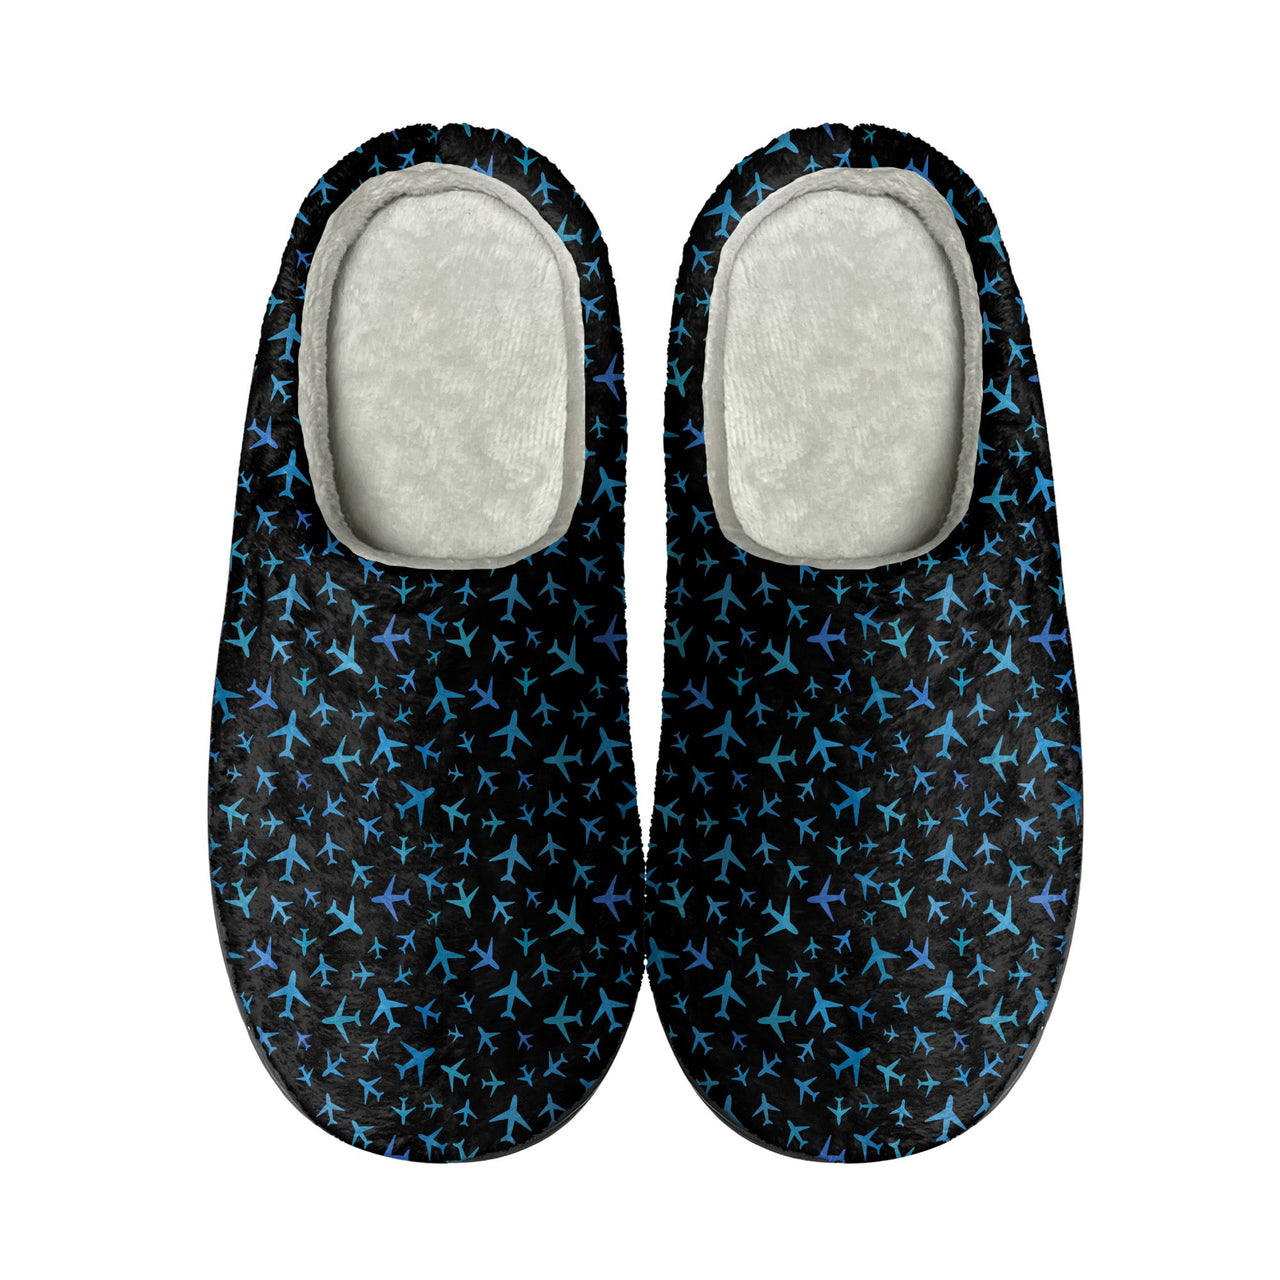 Many Airplanes Black Designed Cotton Slippers